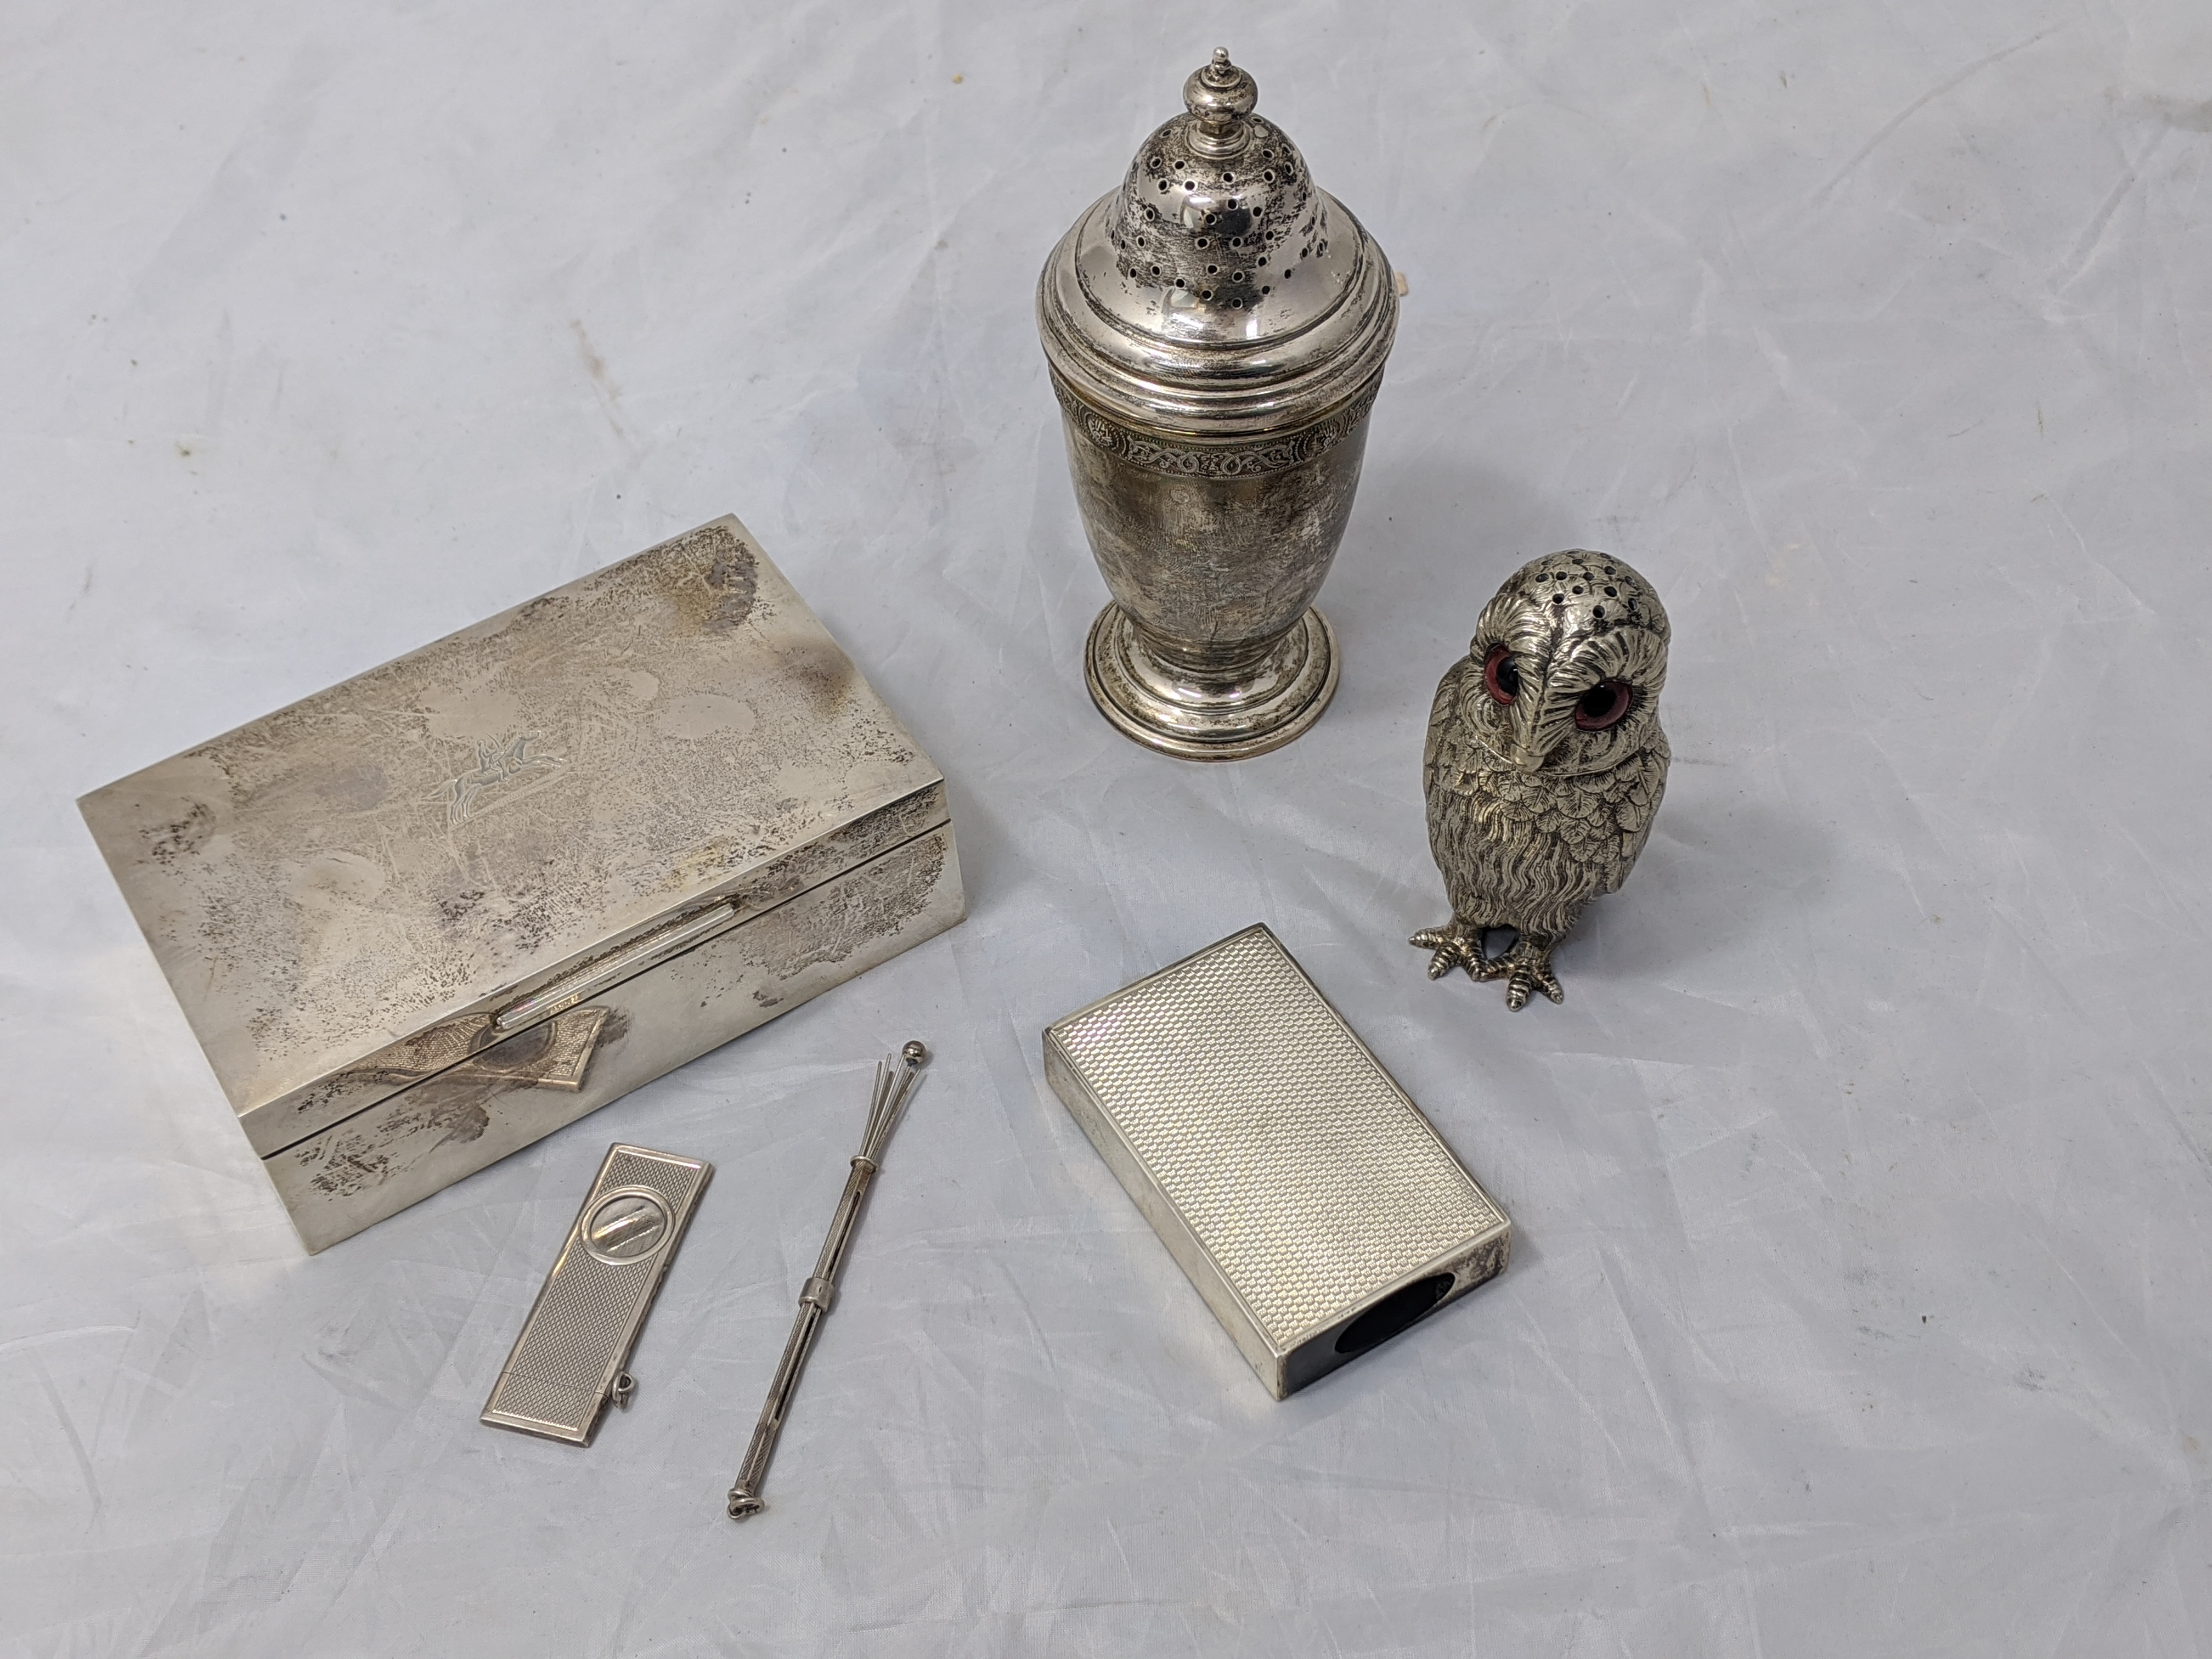 A silver box with horserider crest, a silver pepperette, a silver match box case, a silver twizzle